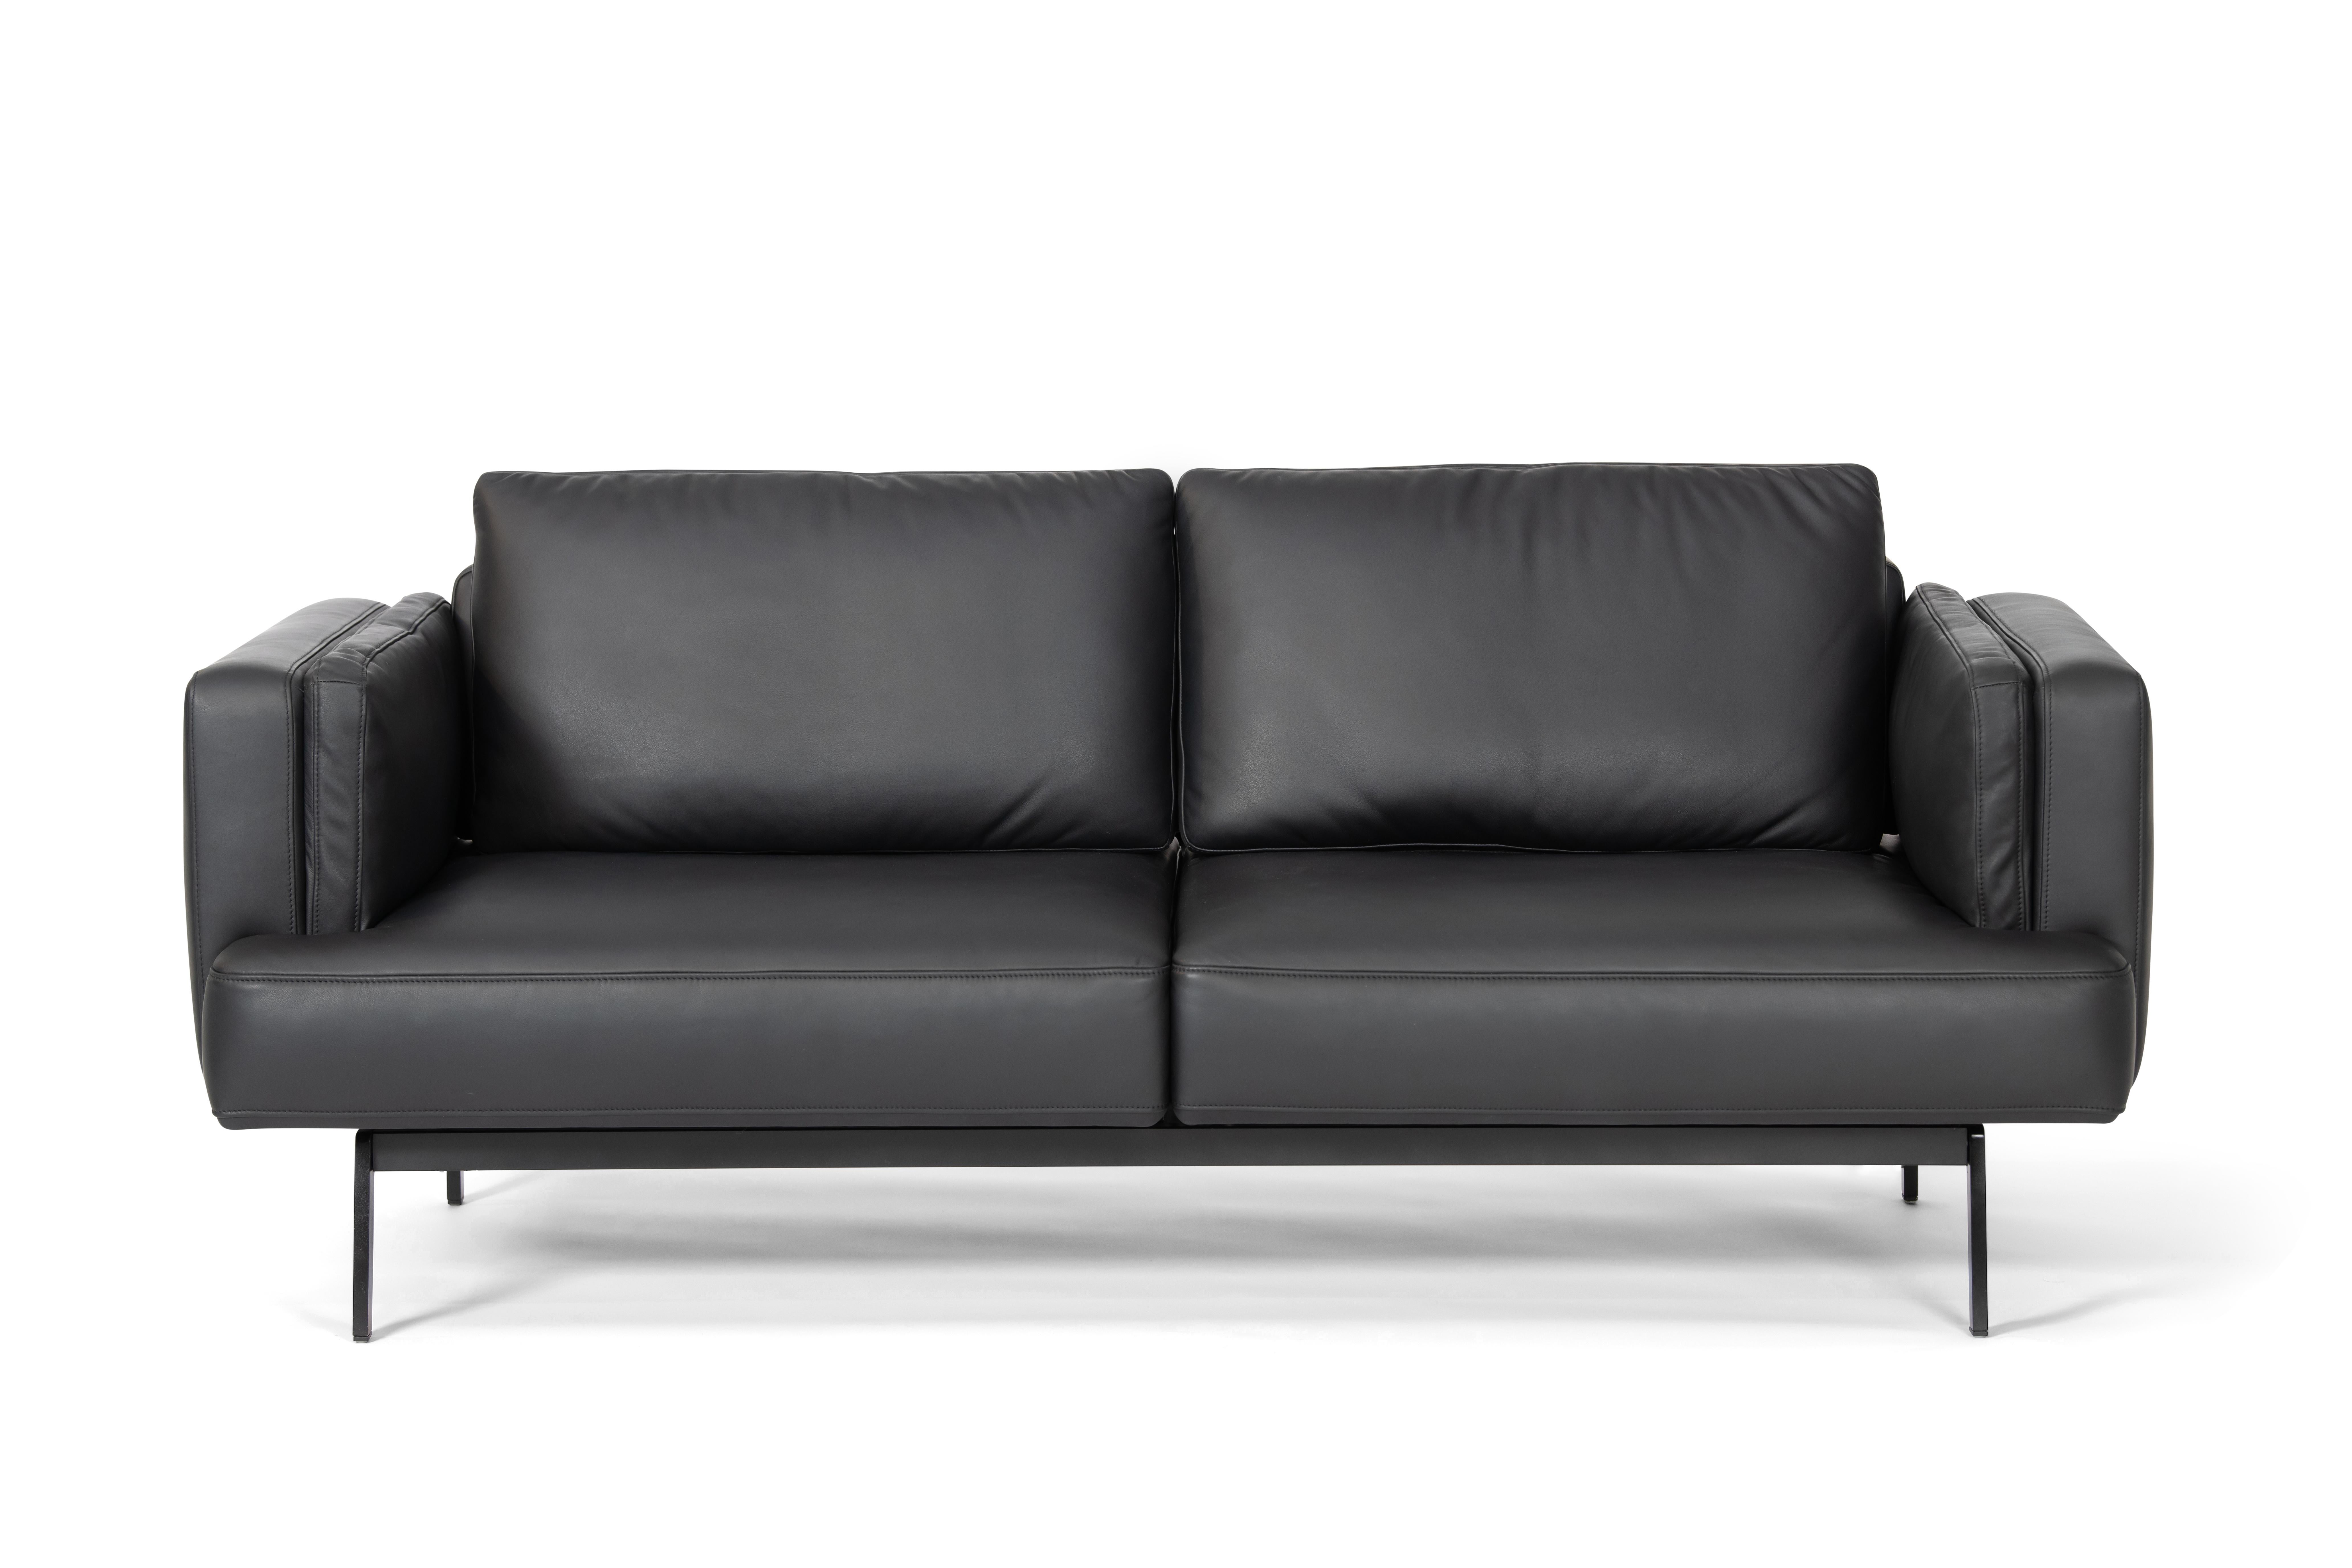 DeSede DS-747/02 Multifunctional Sofa in Black Leather Seat and Back Upholstery For Sale 3